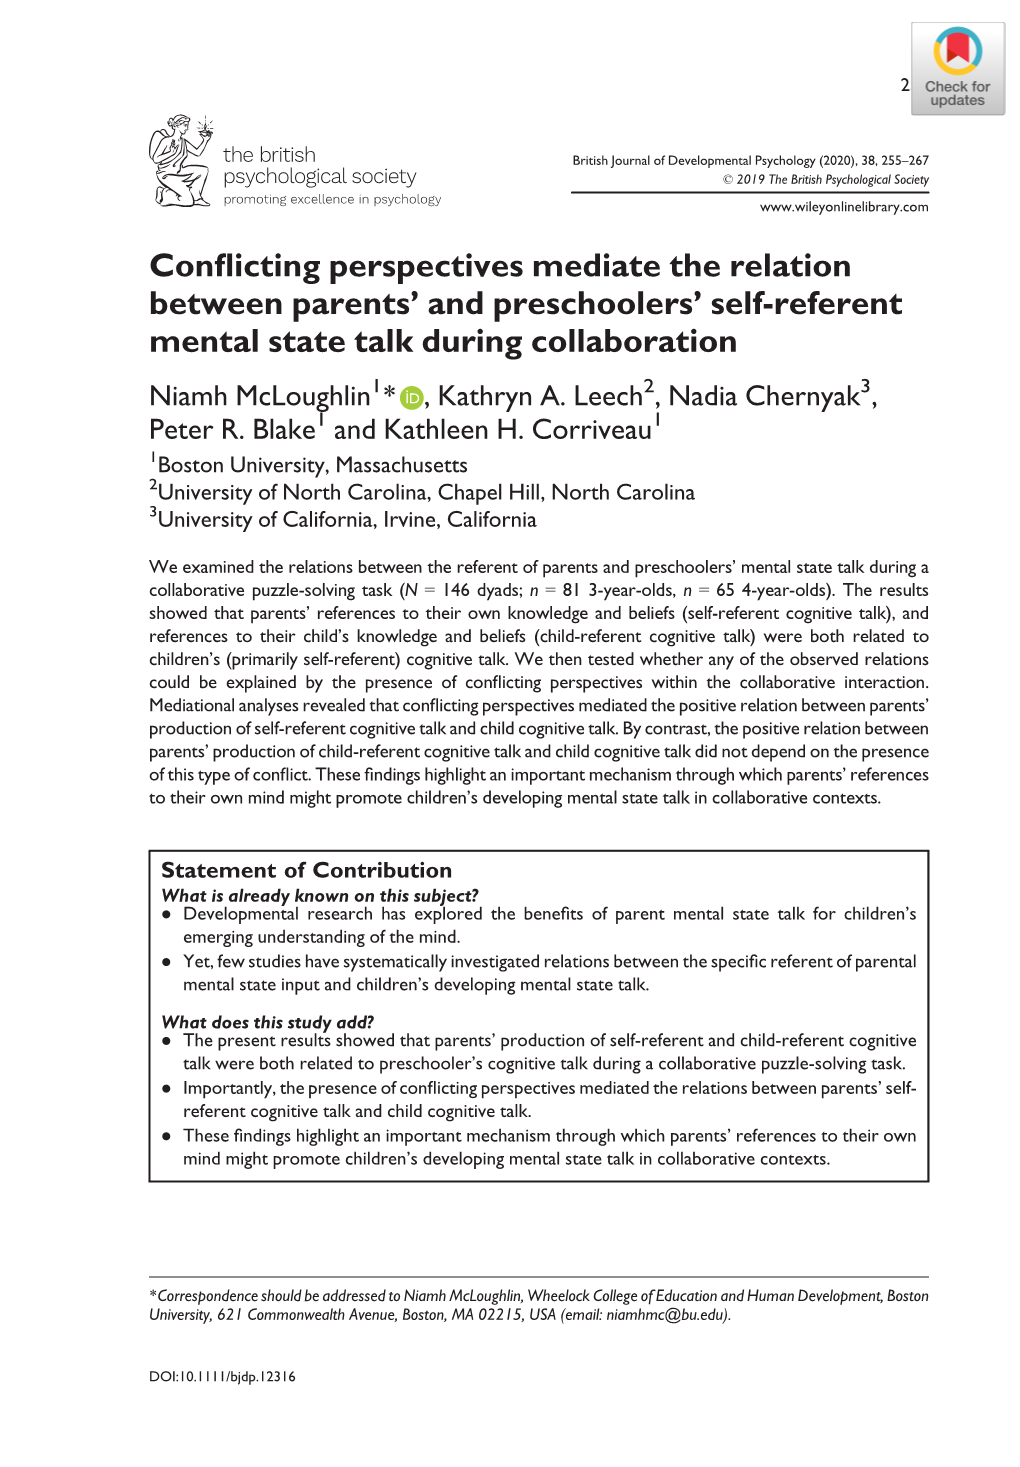 Conflicting Perspectives Mediate the Relation Between Parents' And